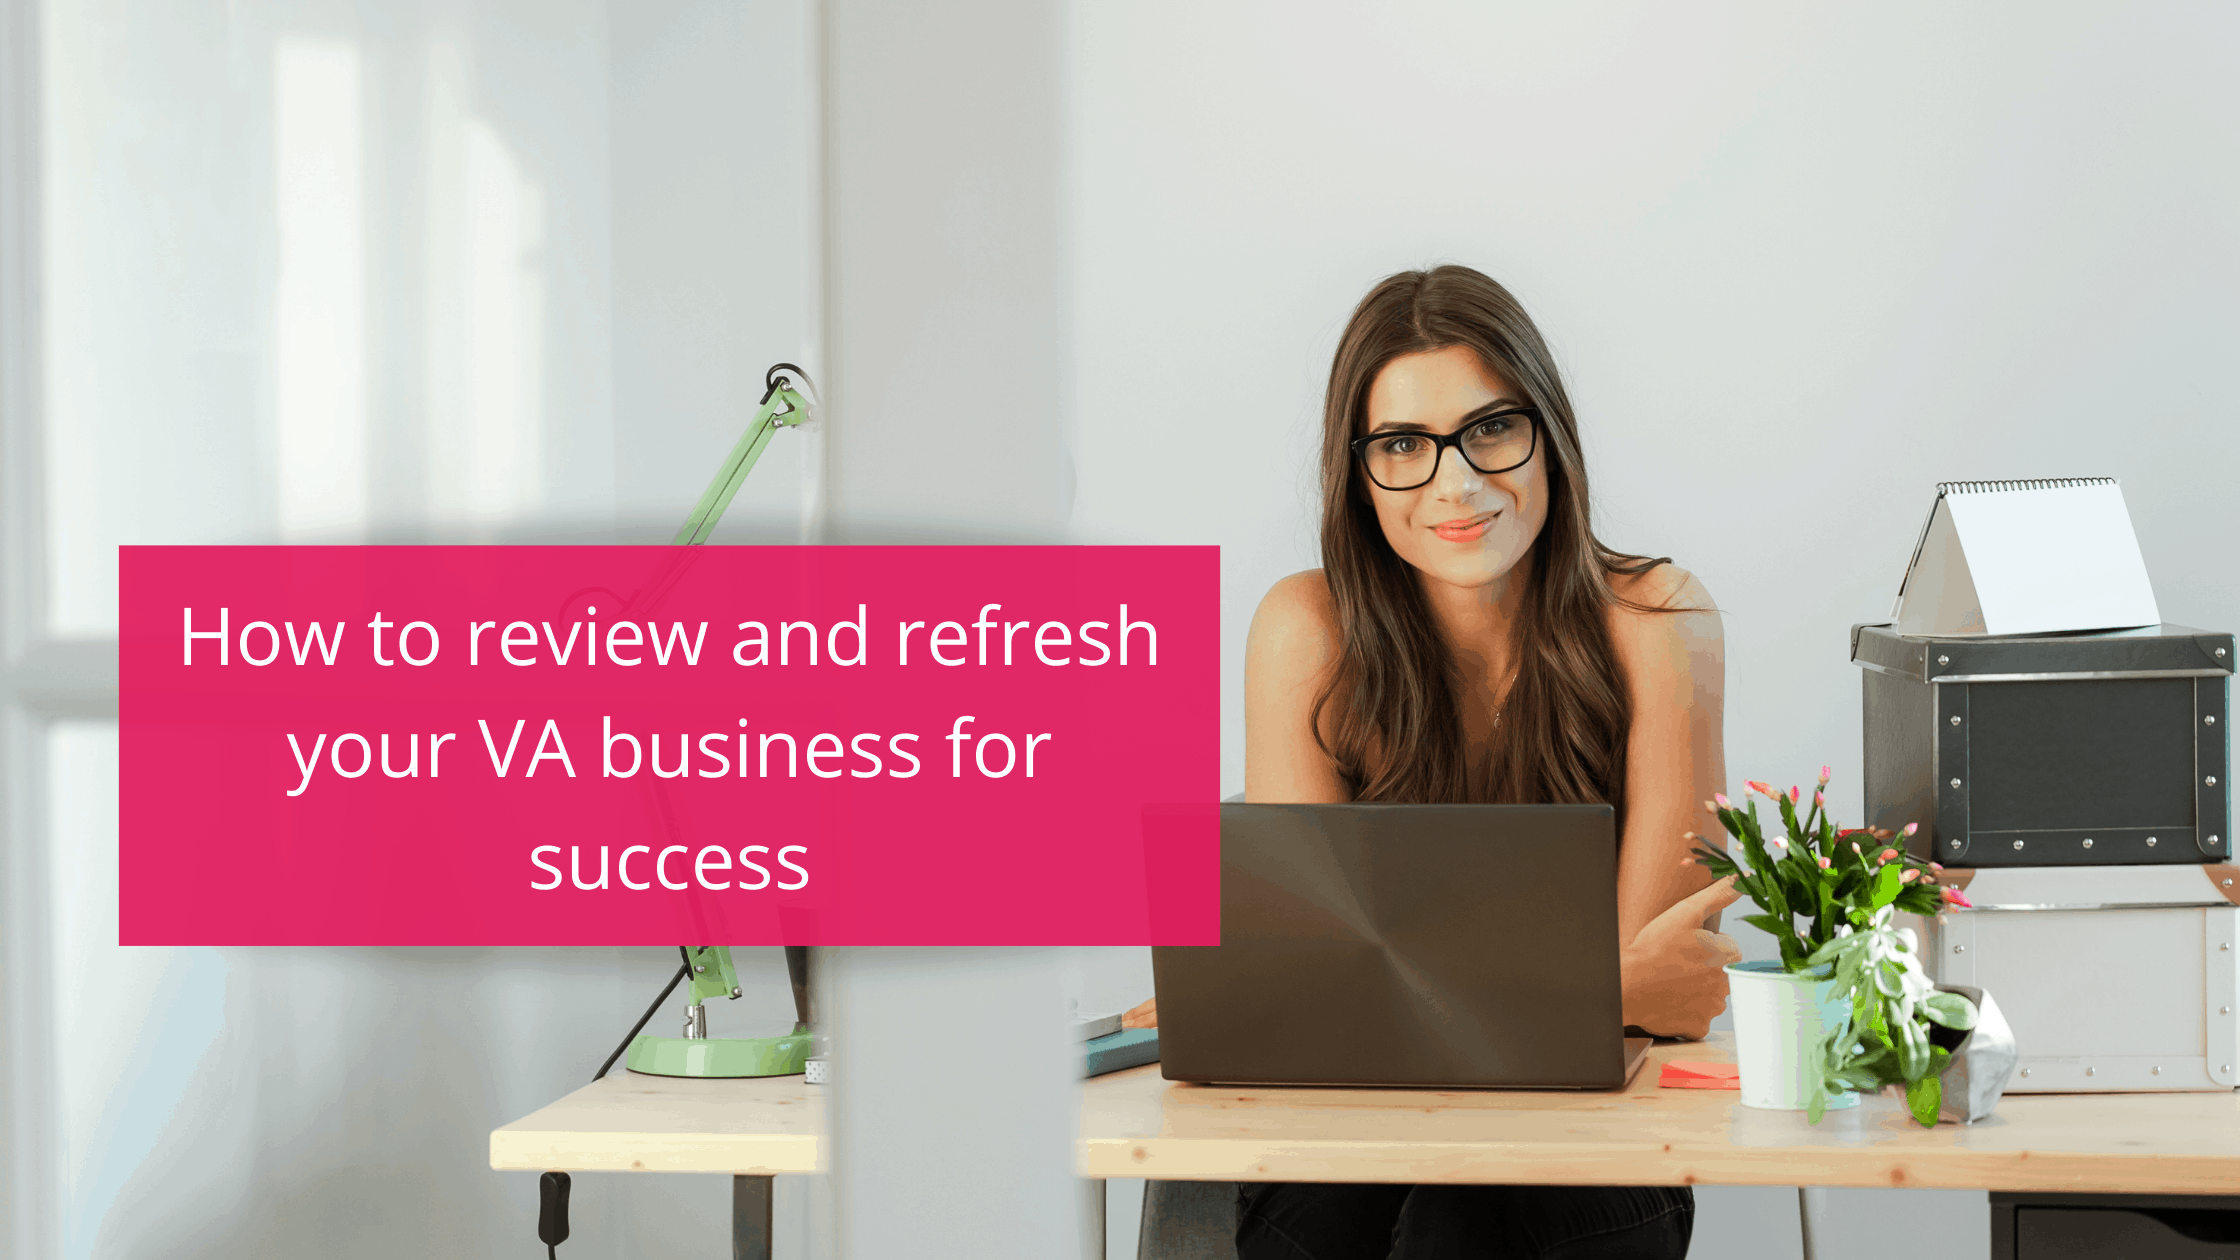 How to review and refresh your VA business for success